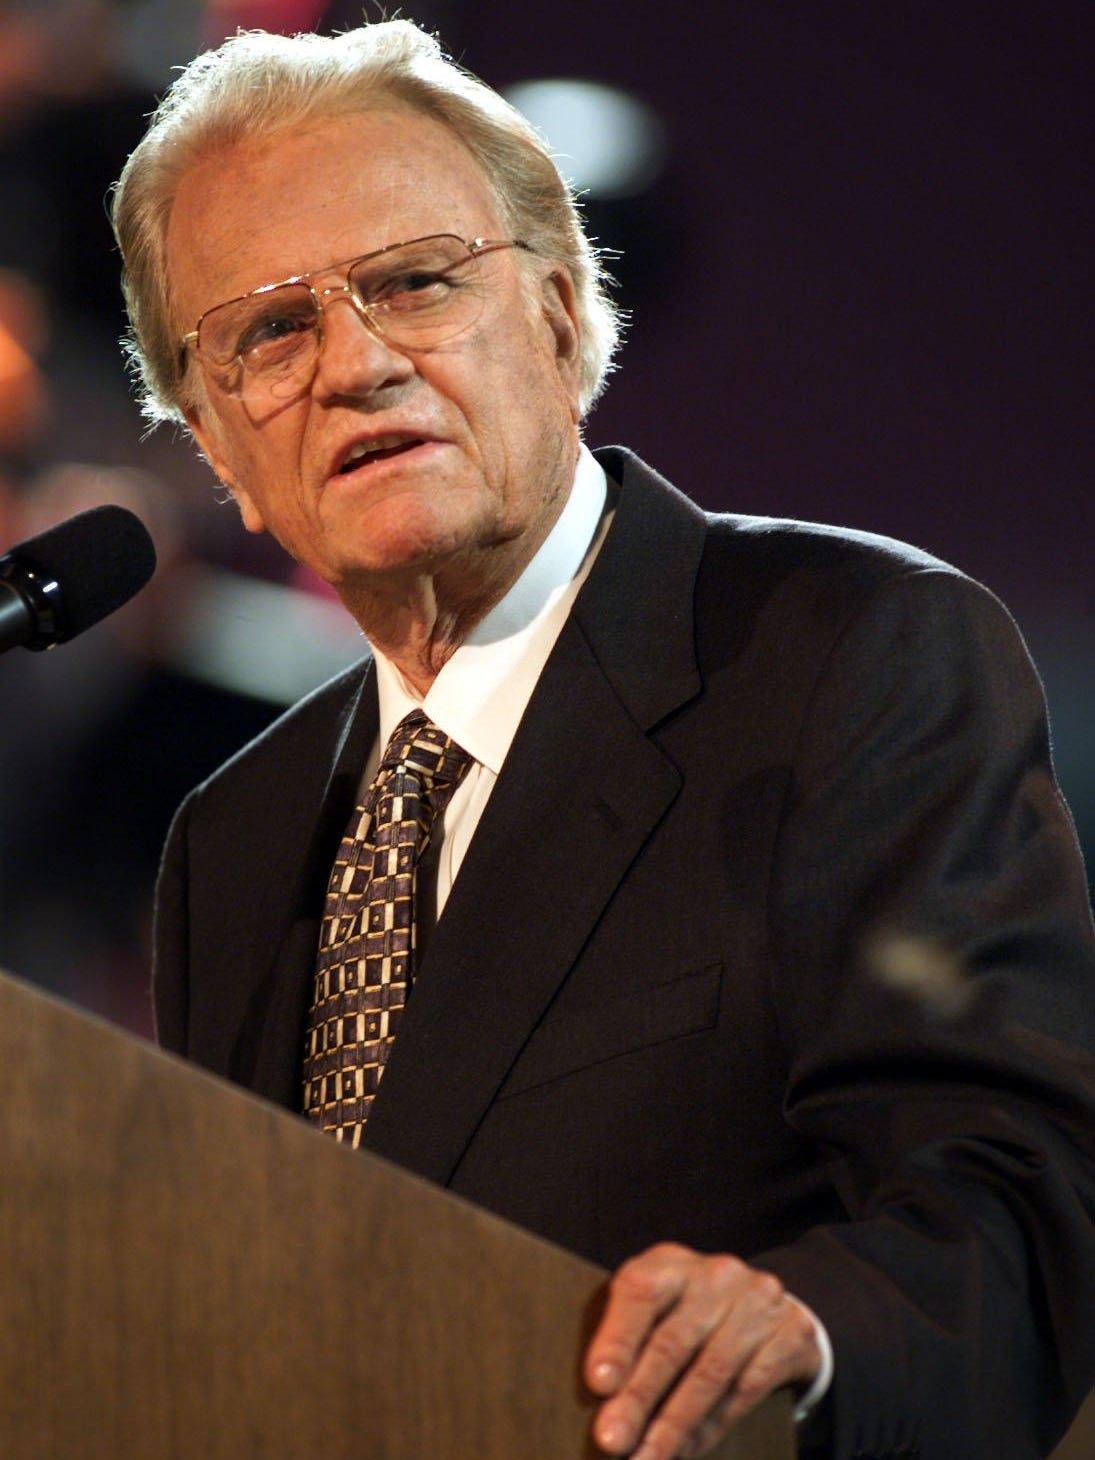 DOWNLOAD MP3: A CURE FOR HEART TROUBLE By Evangelist Billy Graham. (sermon) 18